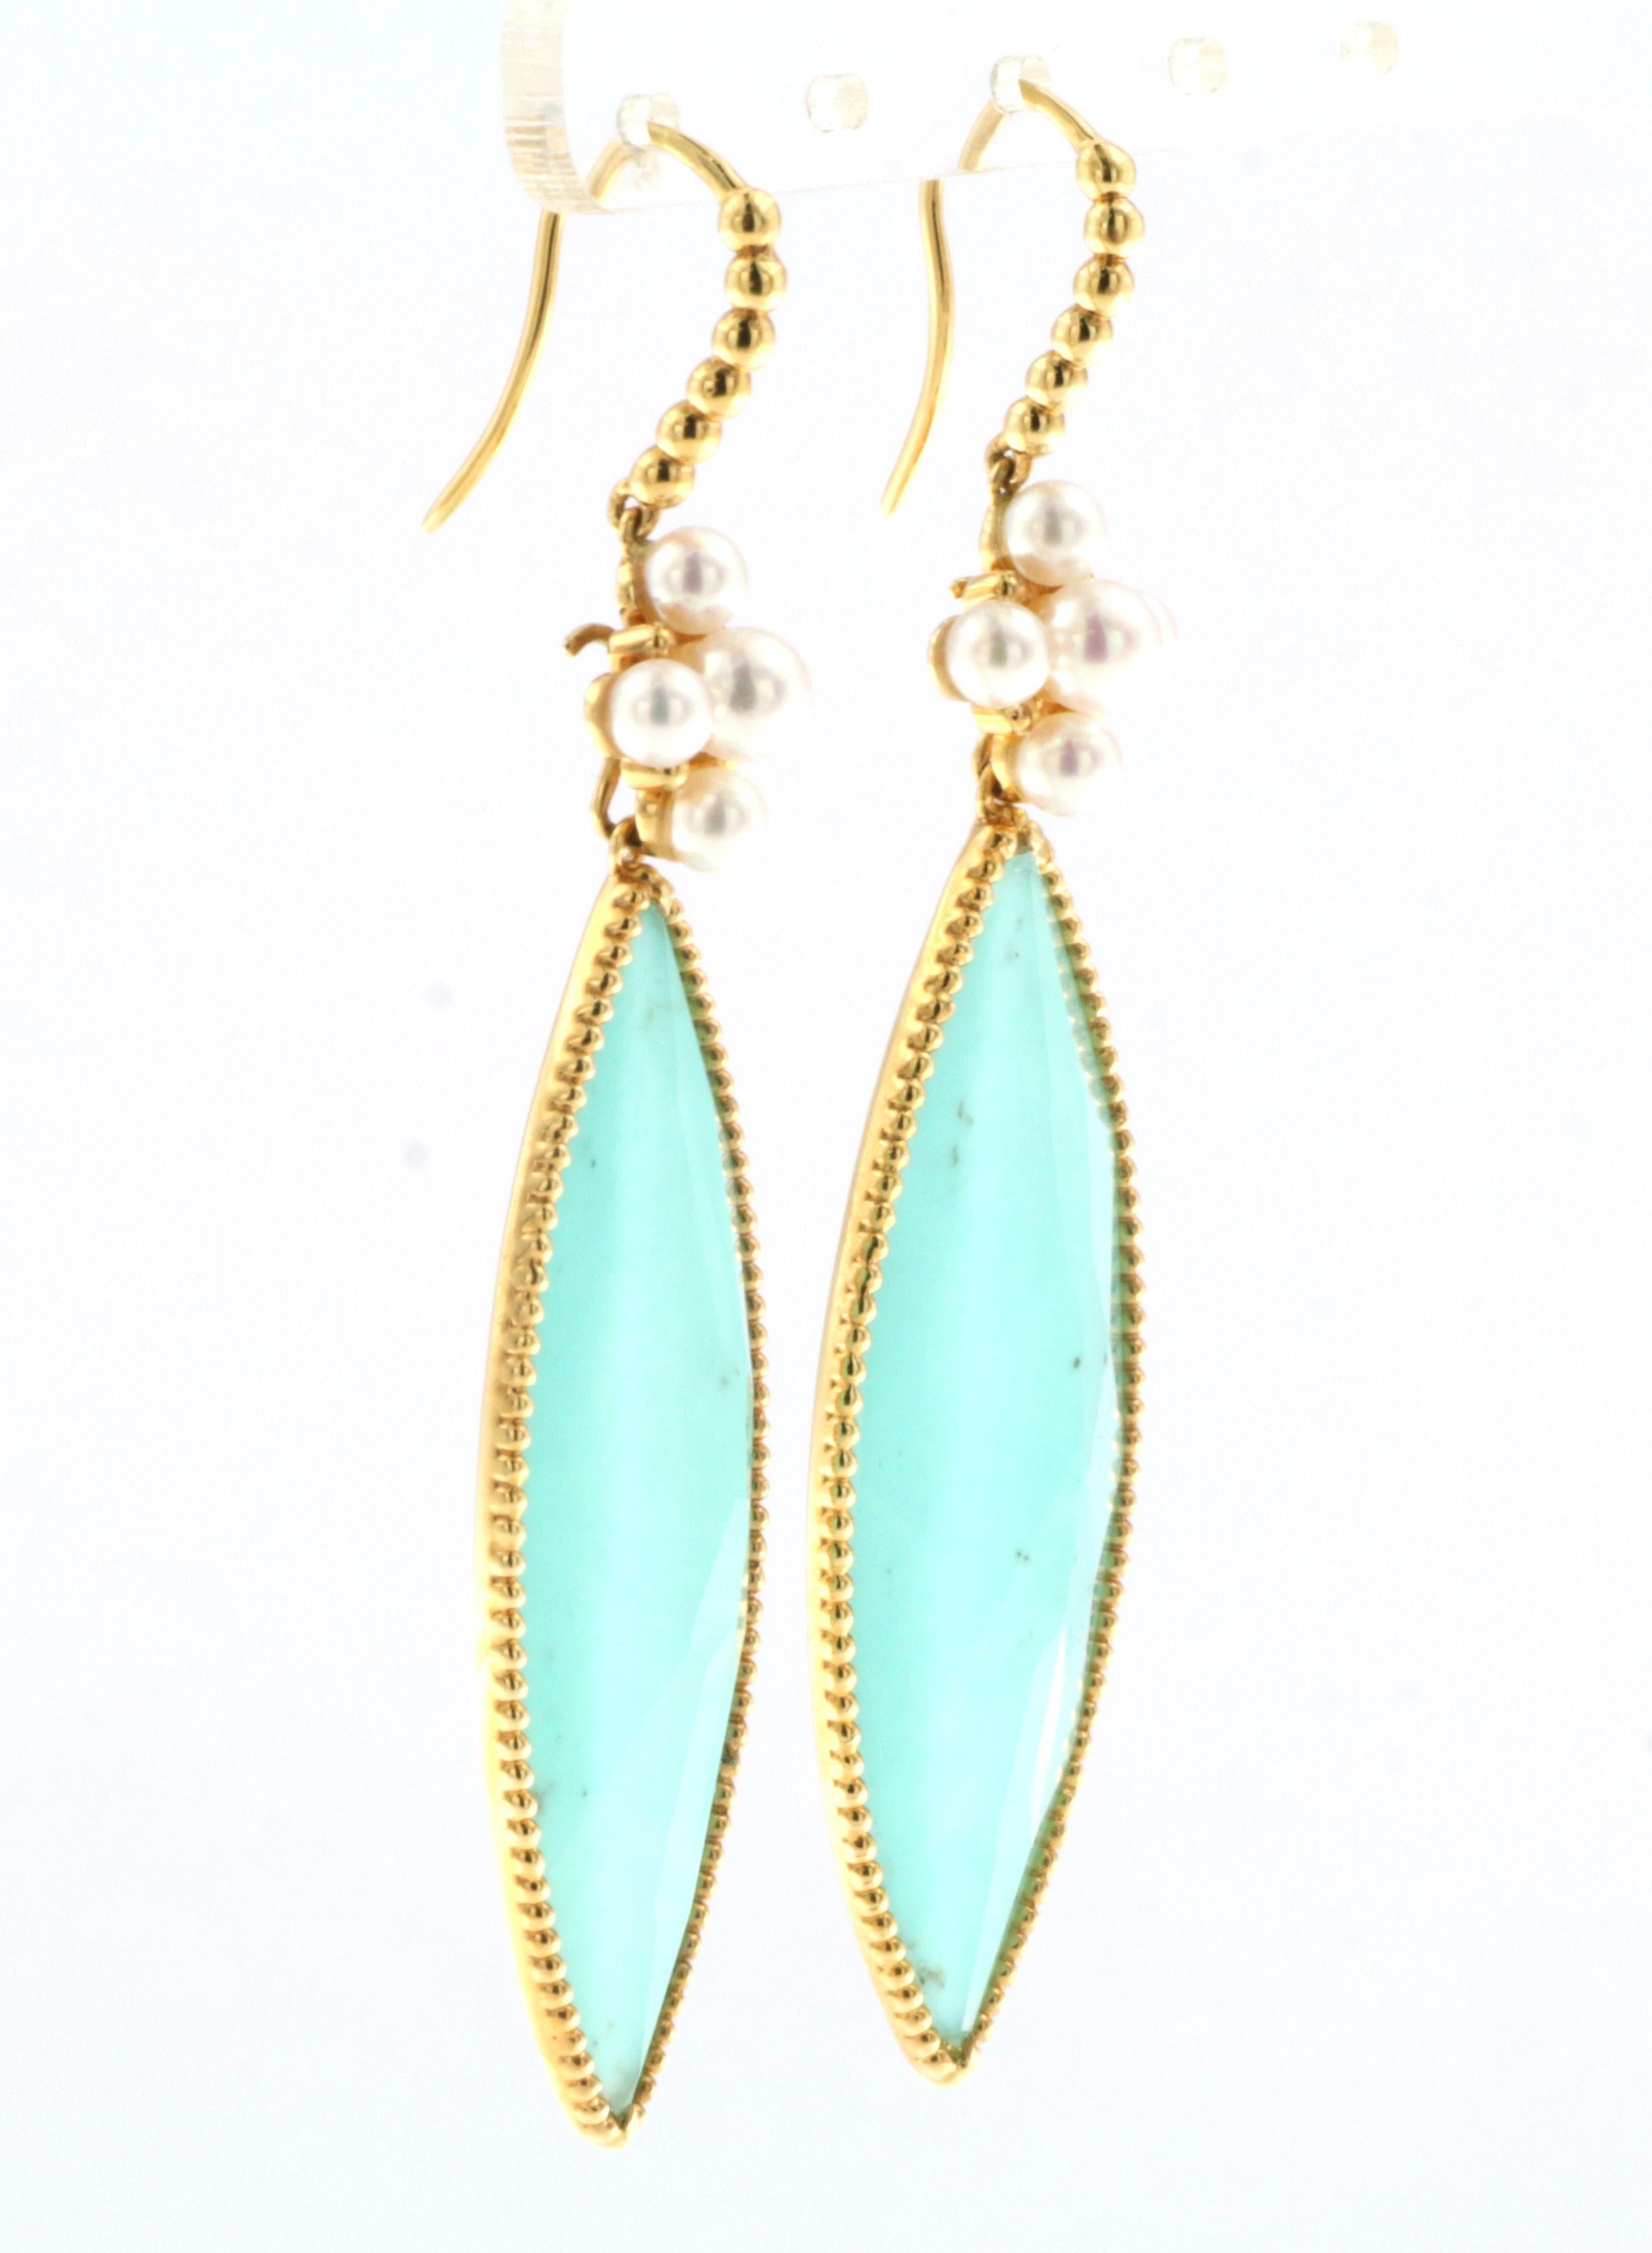 Sliced to display their natural variations in character.
Turquoise slices are topped with clear faceted rock crystal.
The earrings are 18K Yellow Gold.
10 fresh water pearl dimensions range from 3-4.5mm.
There are 27.29ct in Turquoise And Rock